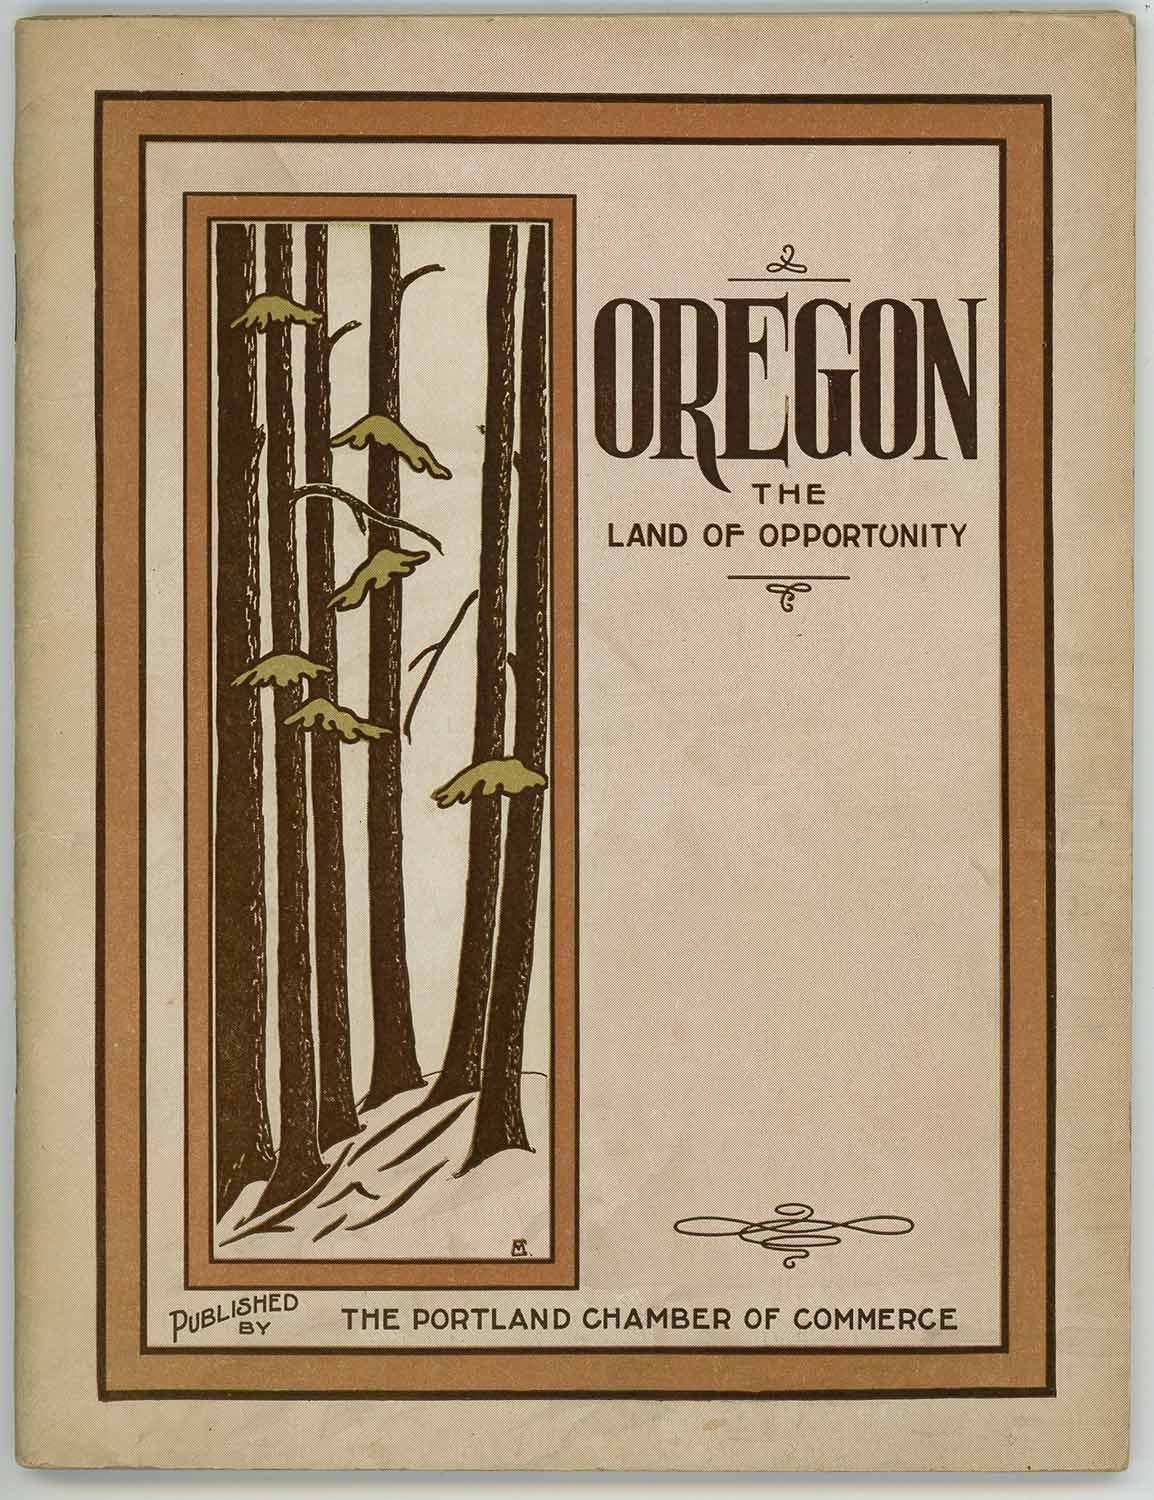 Oregon: The Land of Opportunity.